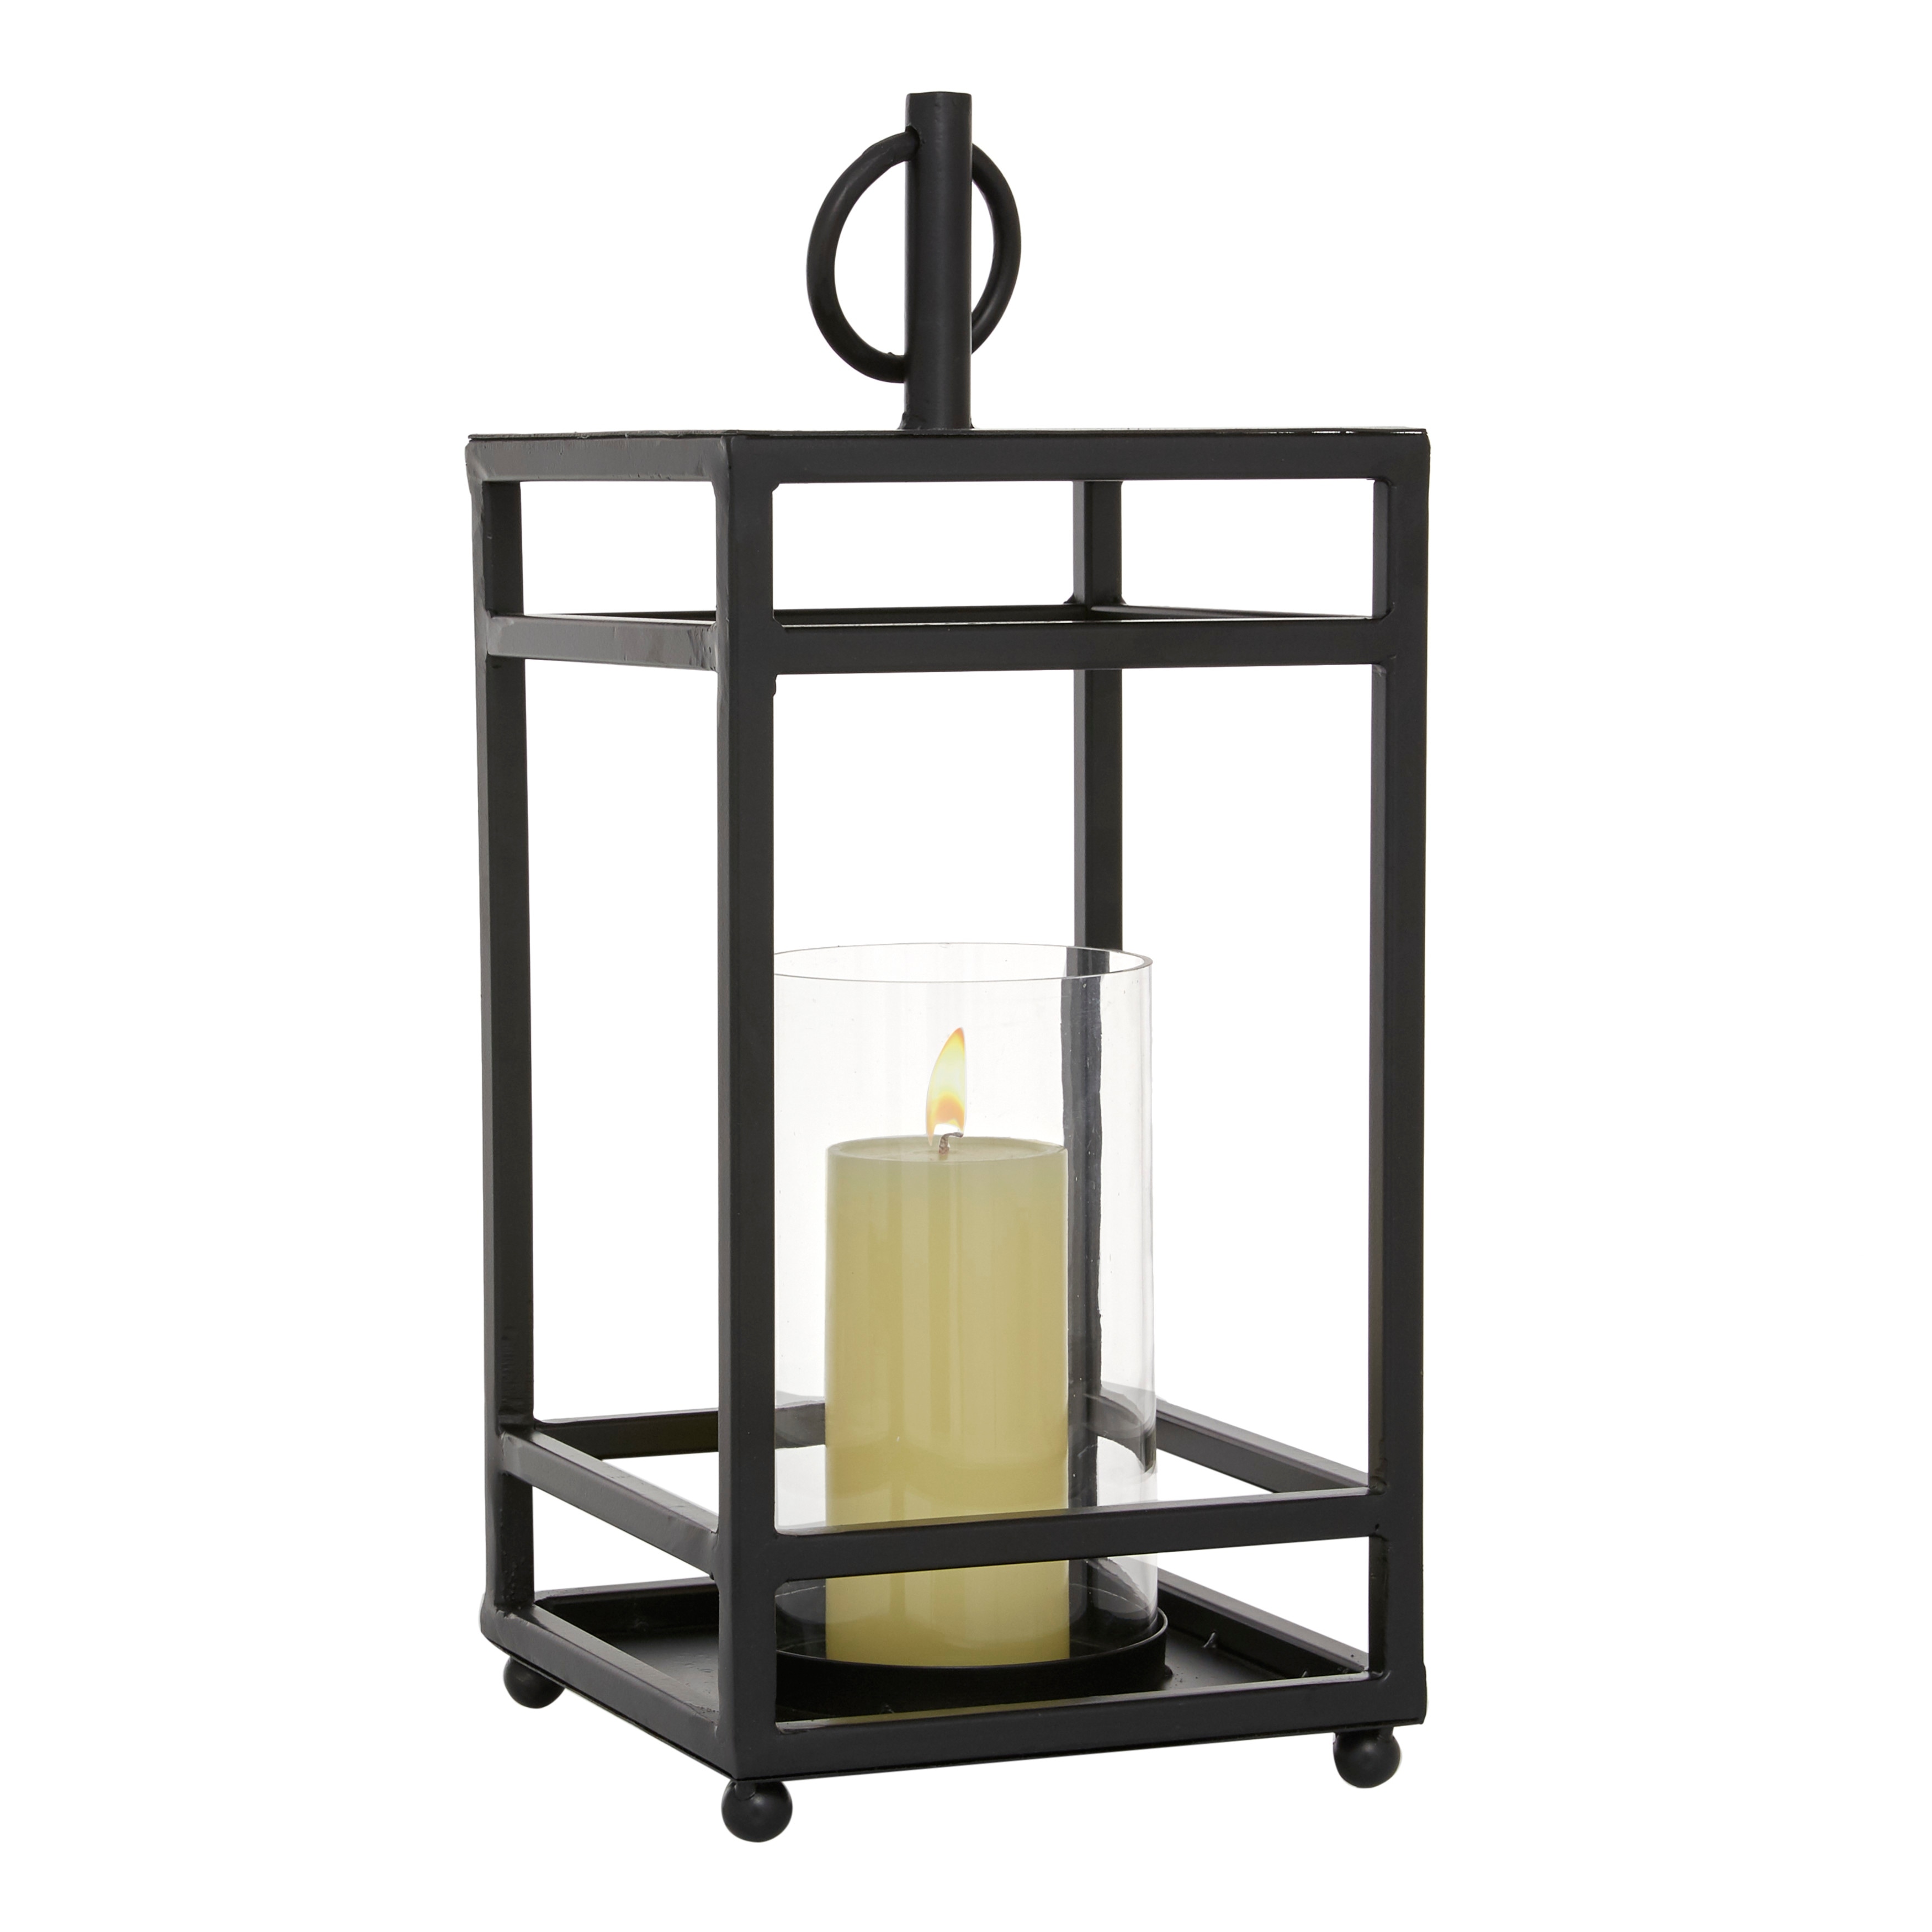 Black Decorative Lanterns with Tempered Glass 18 x 19 x 53 cm Parties,Weddings or Table Decoration Stainless Steel Candle Holders for Indoor Outdoor Events XEMQENER Lantern for Candle